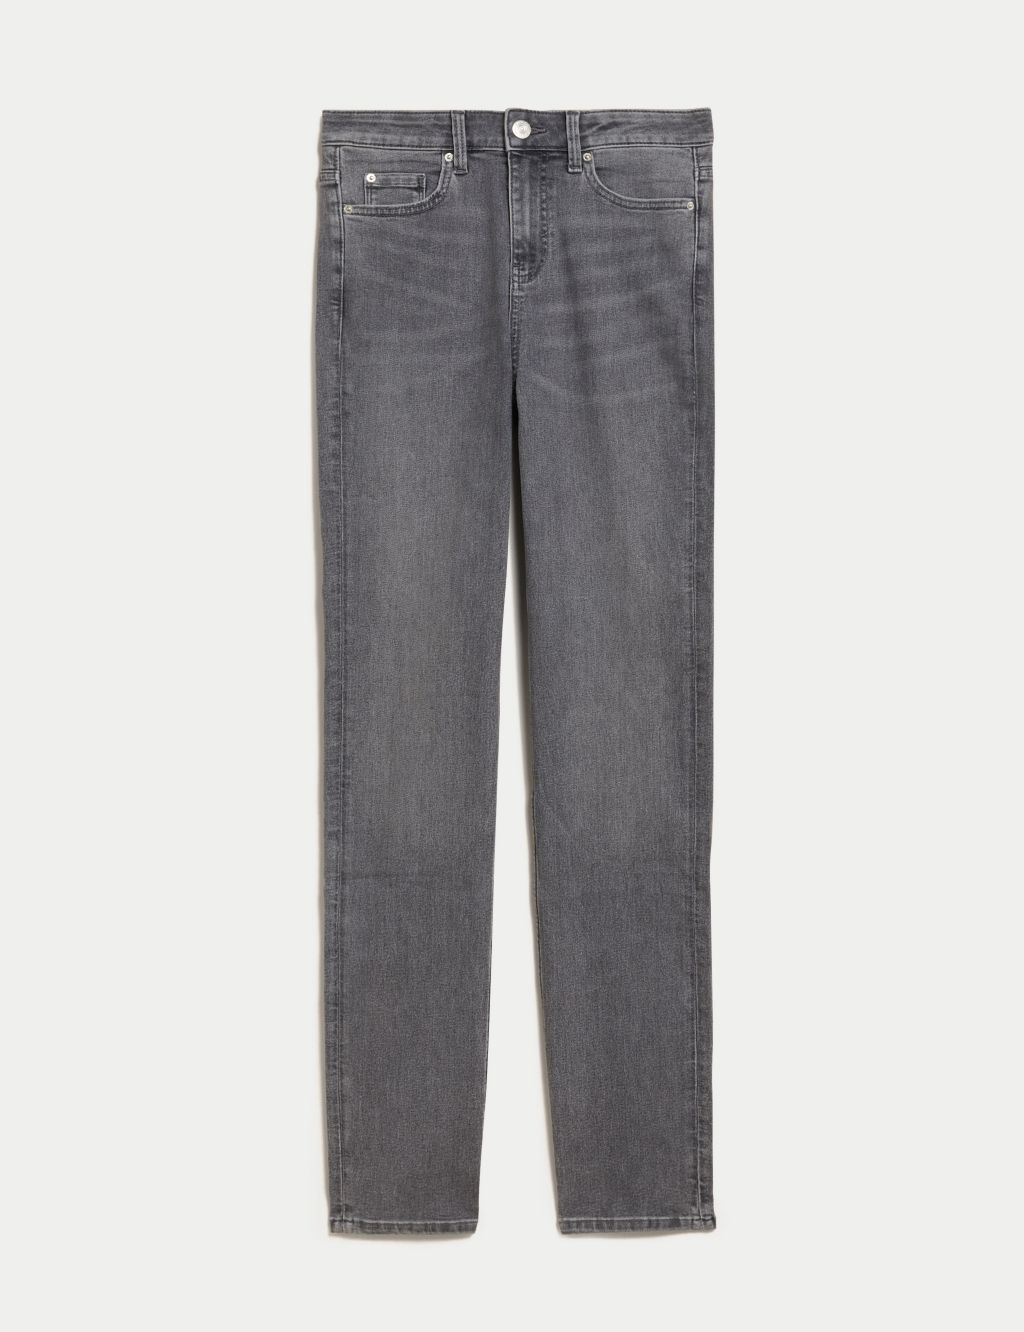 Sienna Straight Leg Jeans with Stretch image 2